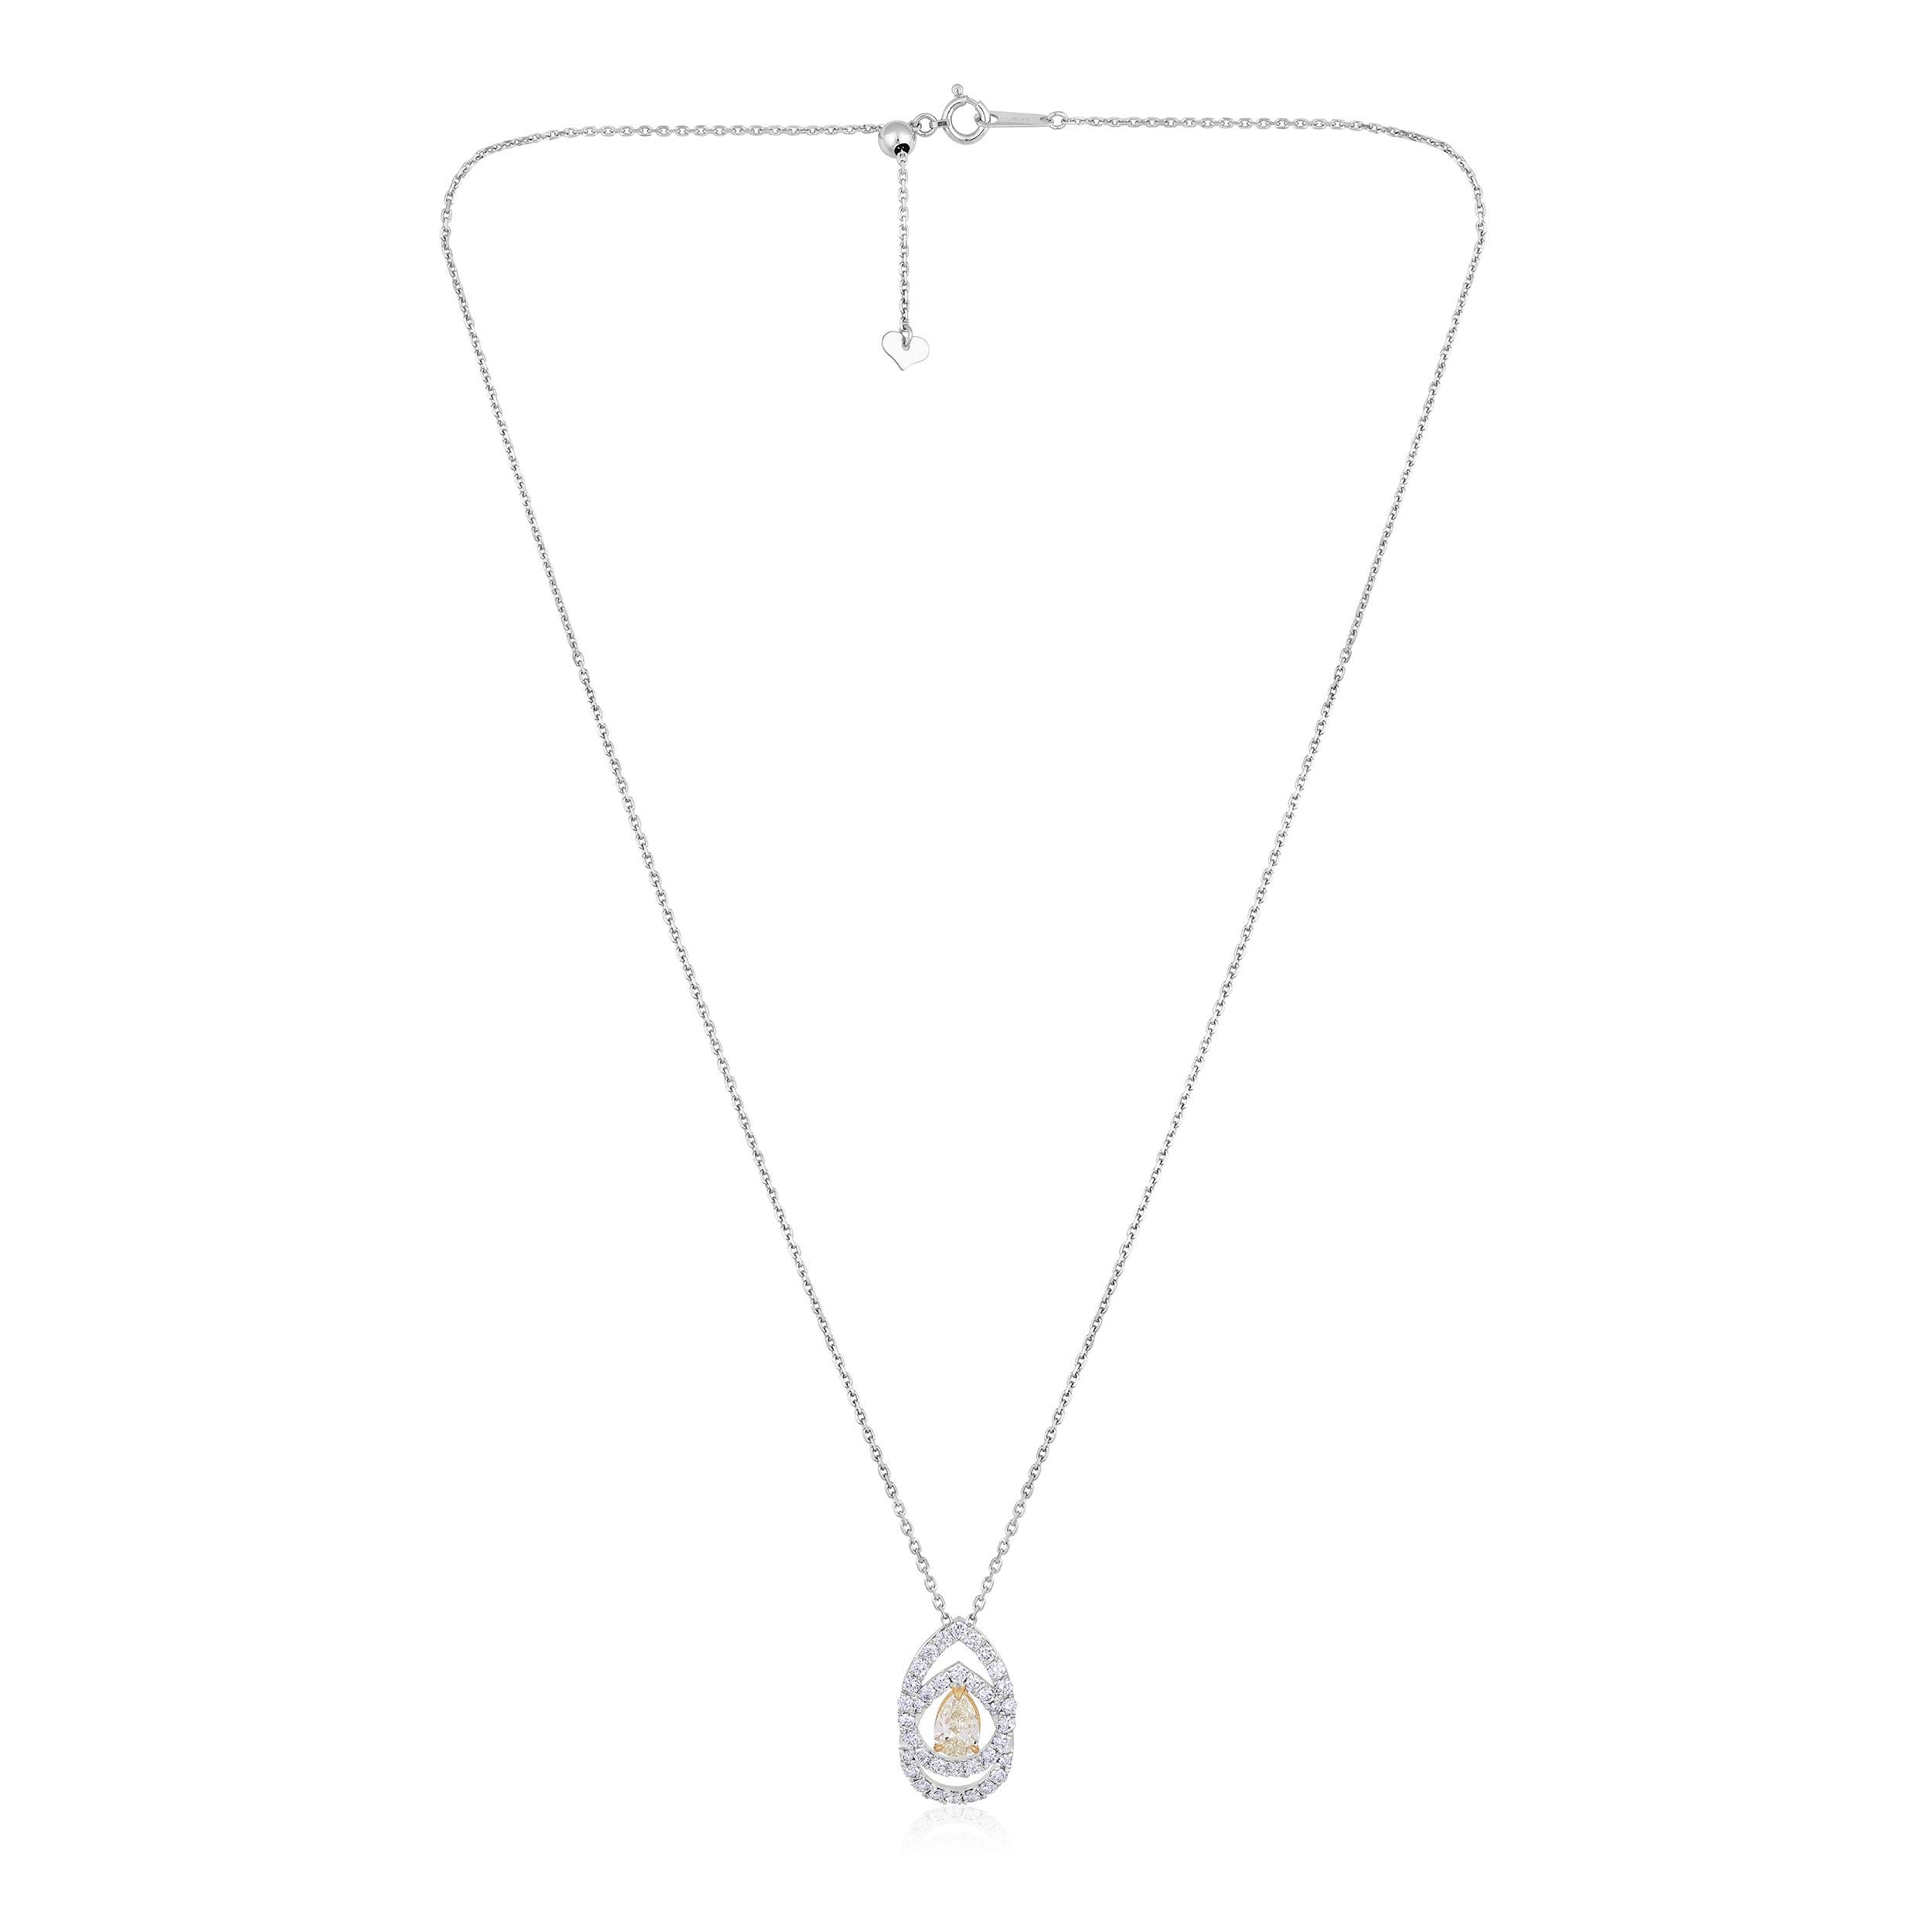 Crafted in 4.87 grams of 18K White Gold, the necklace contains 58 stones of Rose Cut Natural Diamonds with a total of 0.8 carat in E-F color and VVS-VS clarity combined with 1 stone of GIA Certified Pear Natural Diamond with a total of 0.69 carat.